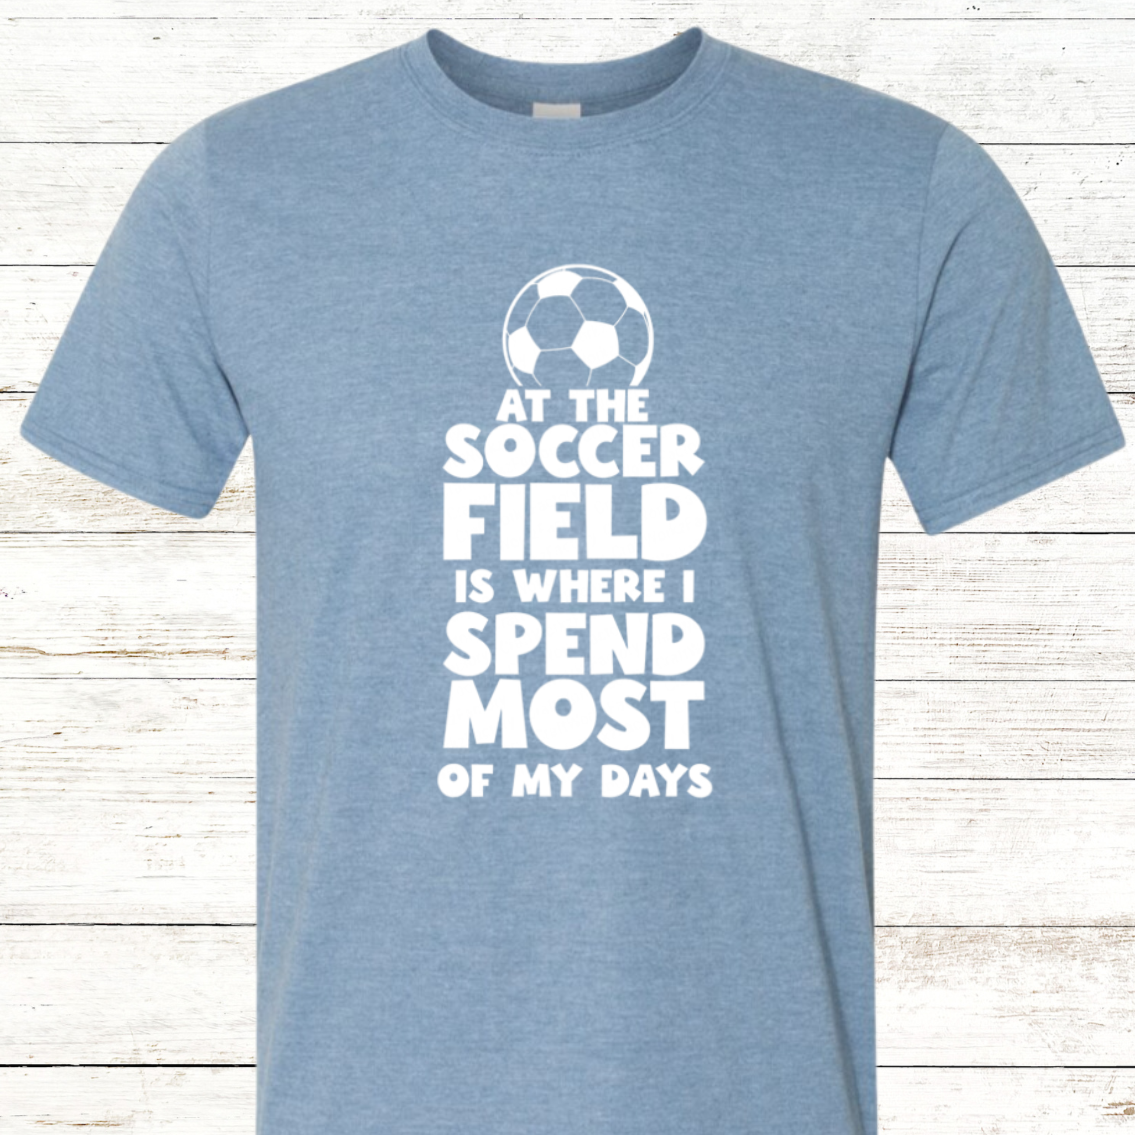 At the soccer field is where i spend most of my days: Soccer shirt with Back Personalization Option